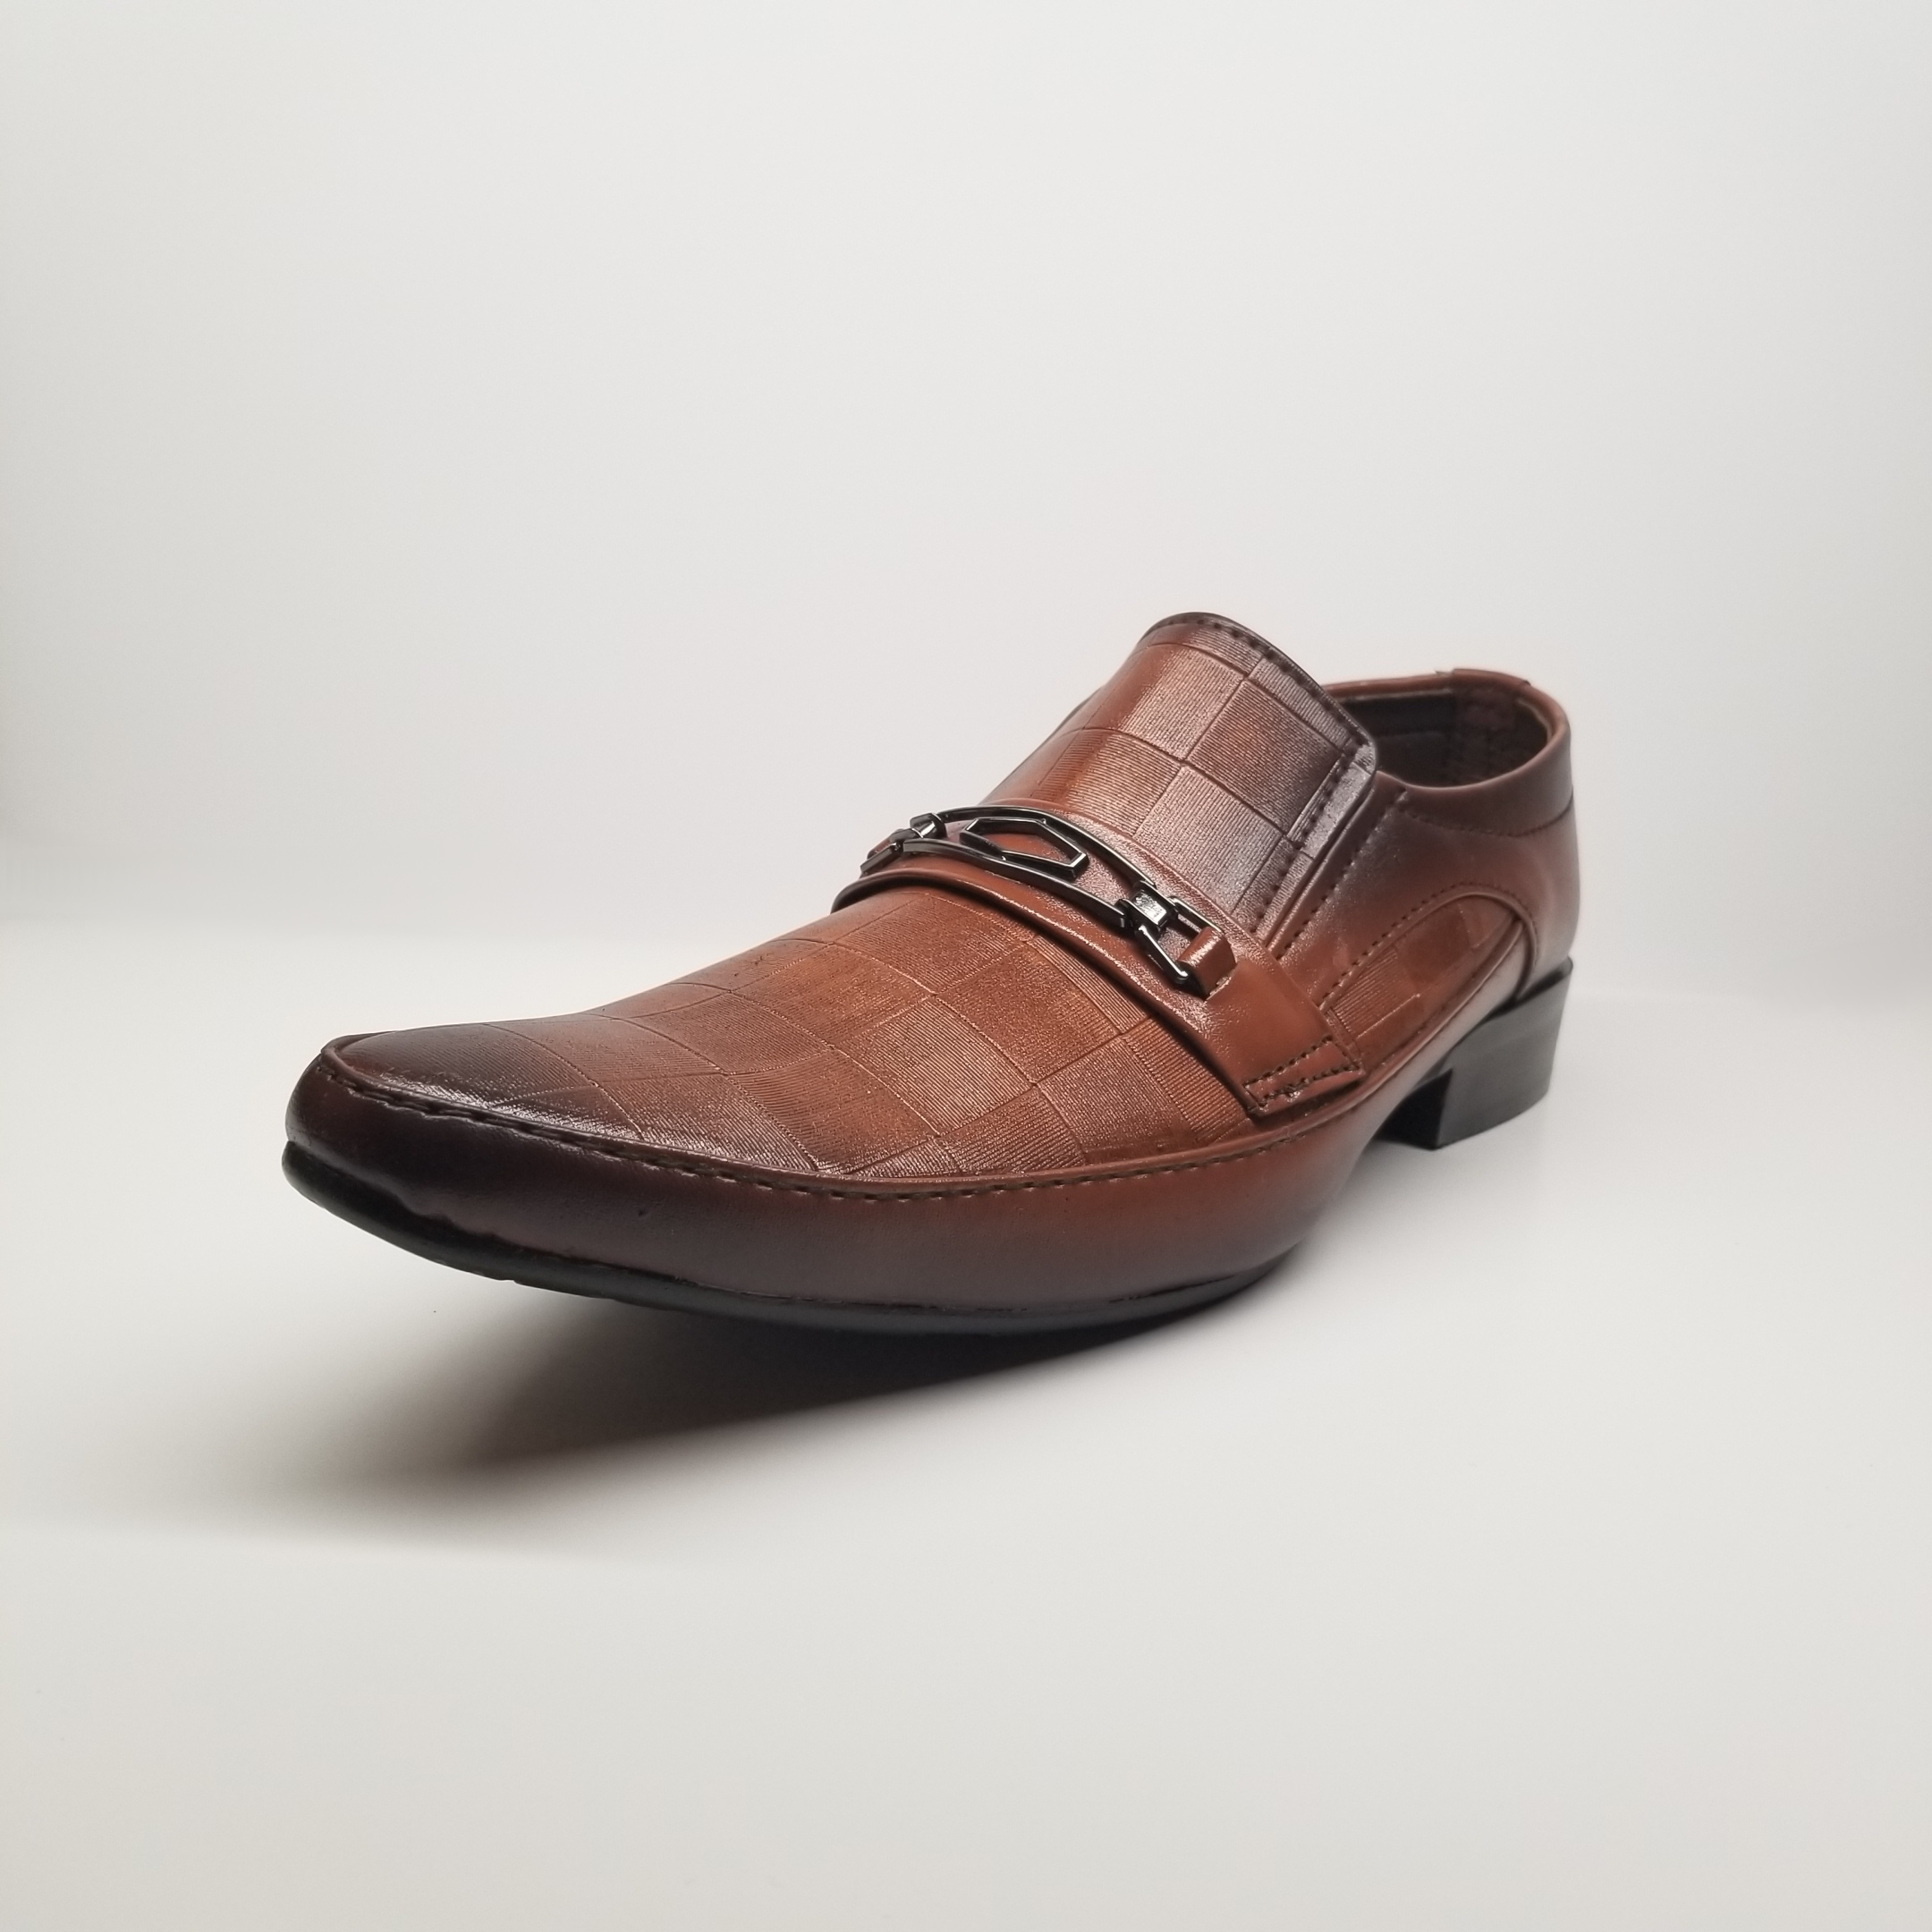 Chess Master dress shoes by Walkies at NMFootwear.com